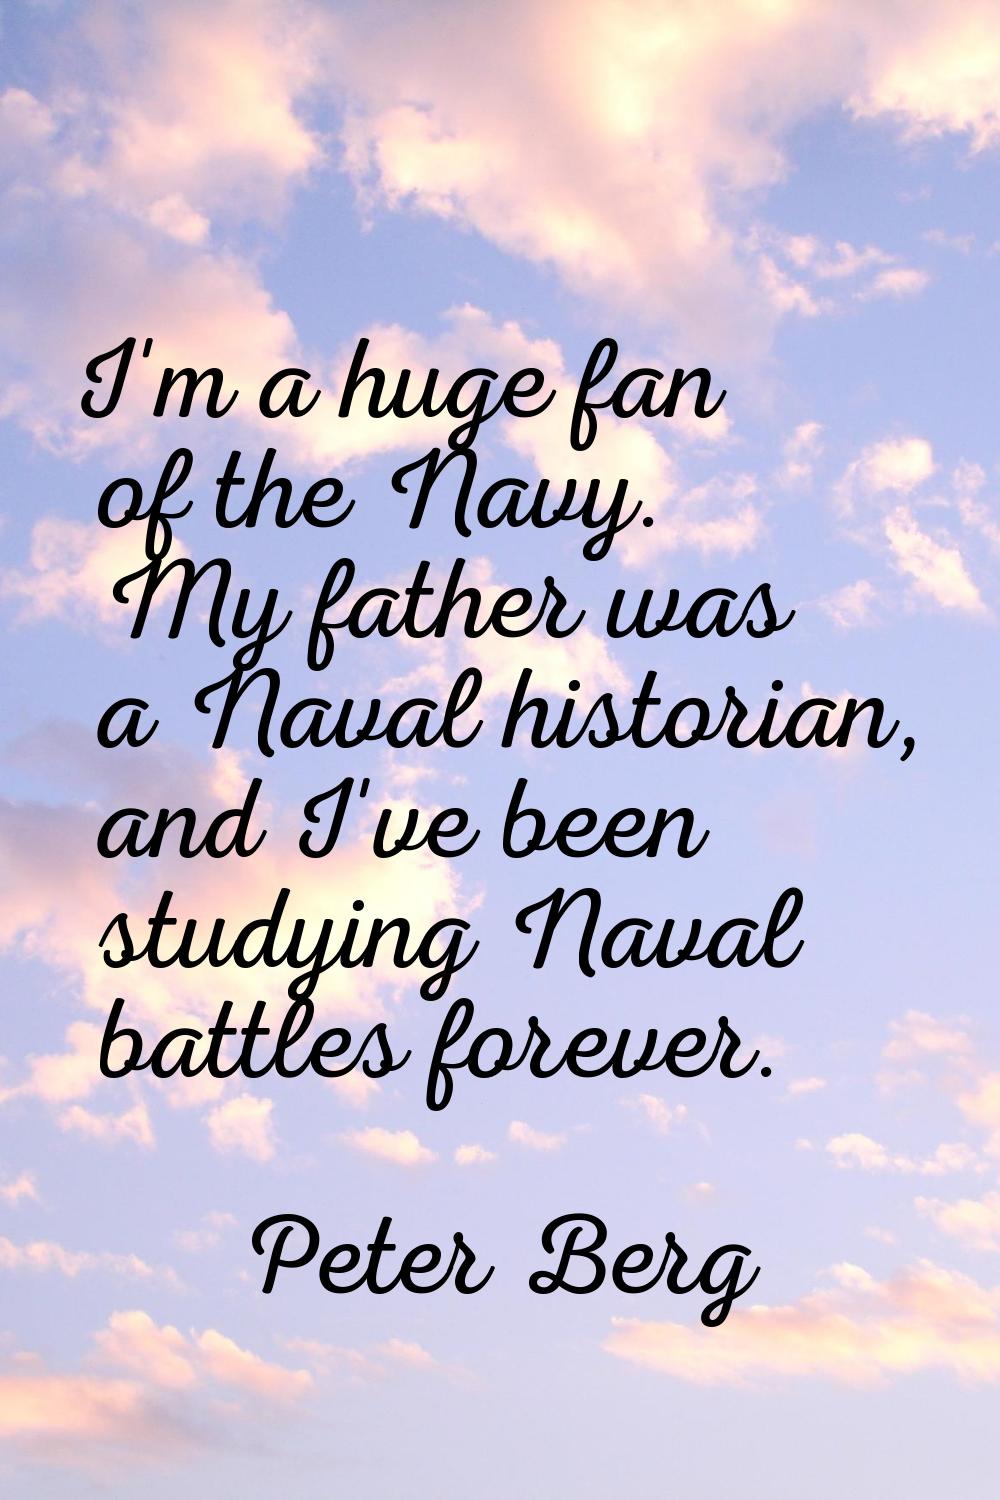 I'm a huge fan of the Navy. My father was a Naval historian, and I've been studying Naval battles f